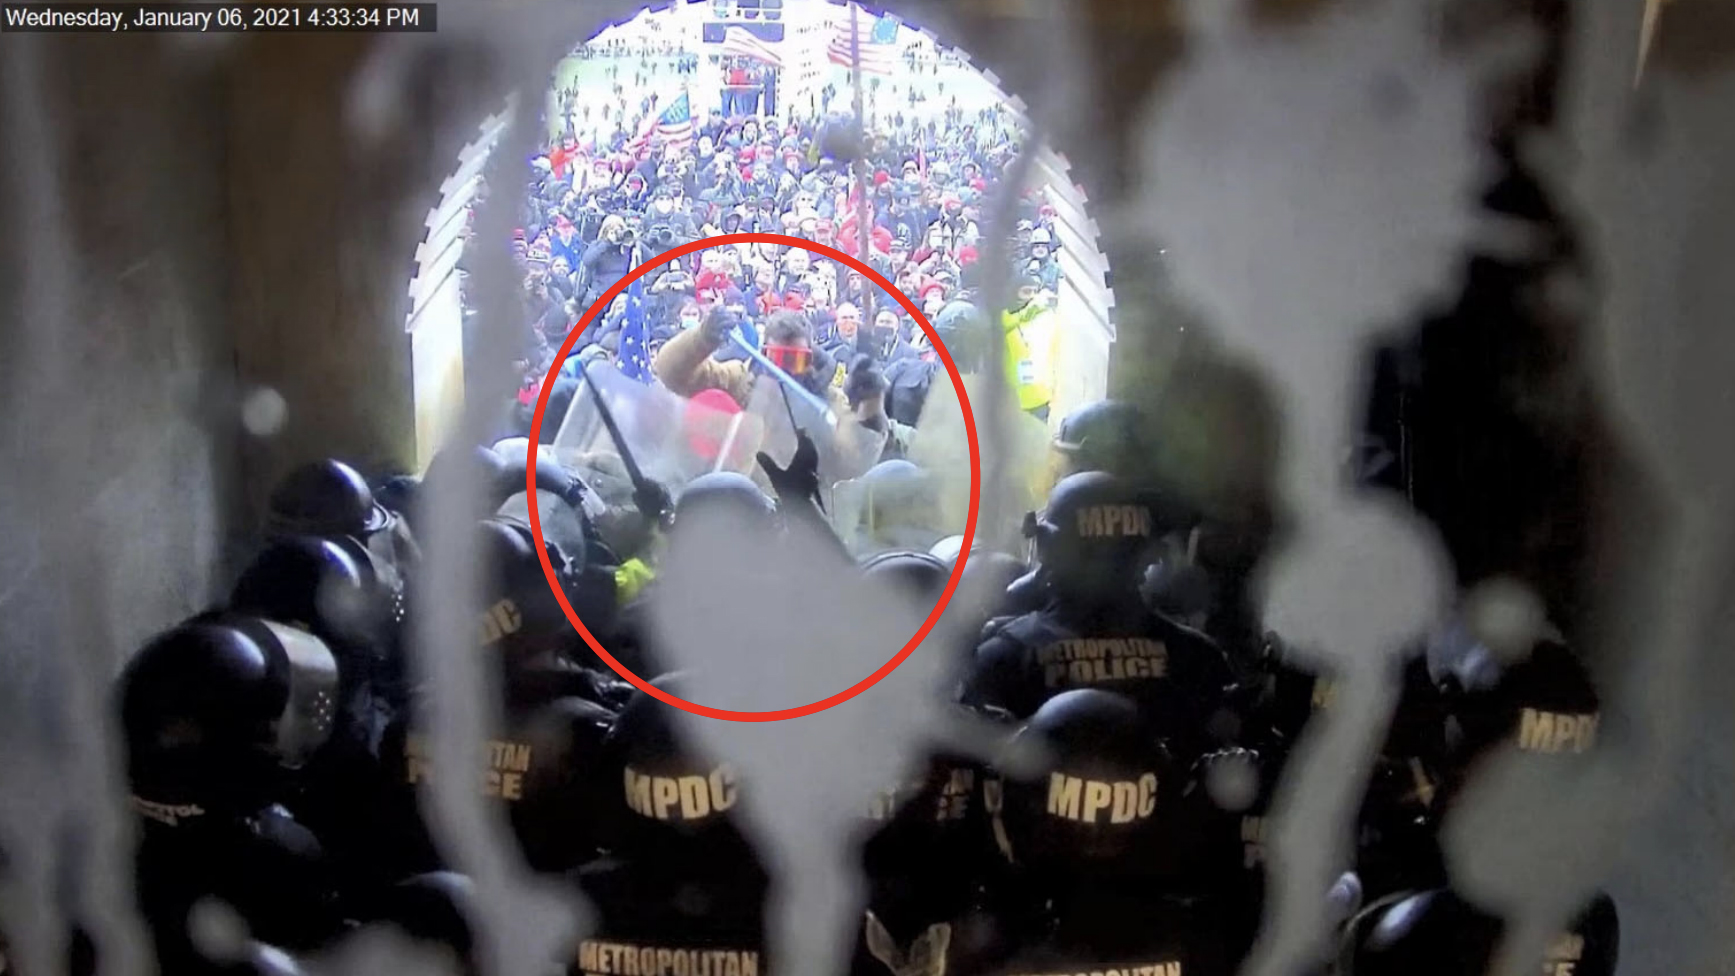 Photo evidence of Scott Miller, circled, hitting Capitol police officers with a pole on Jan. 6, 2021. (Photo via U.S. government sentencing memorandum)